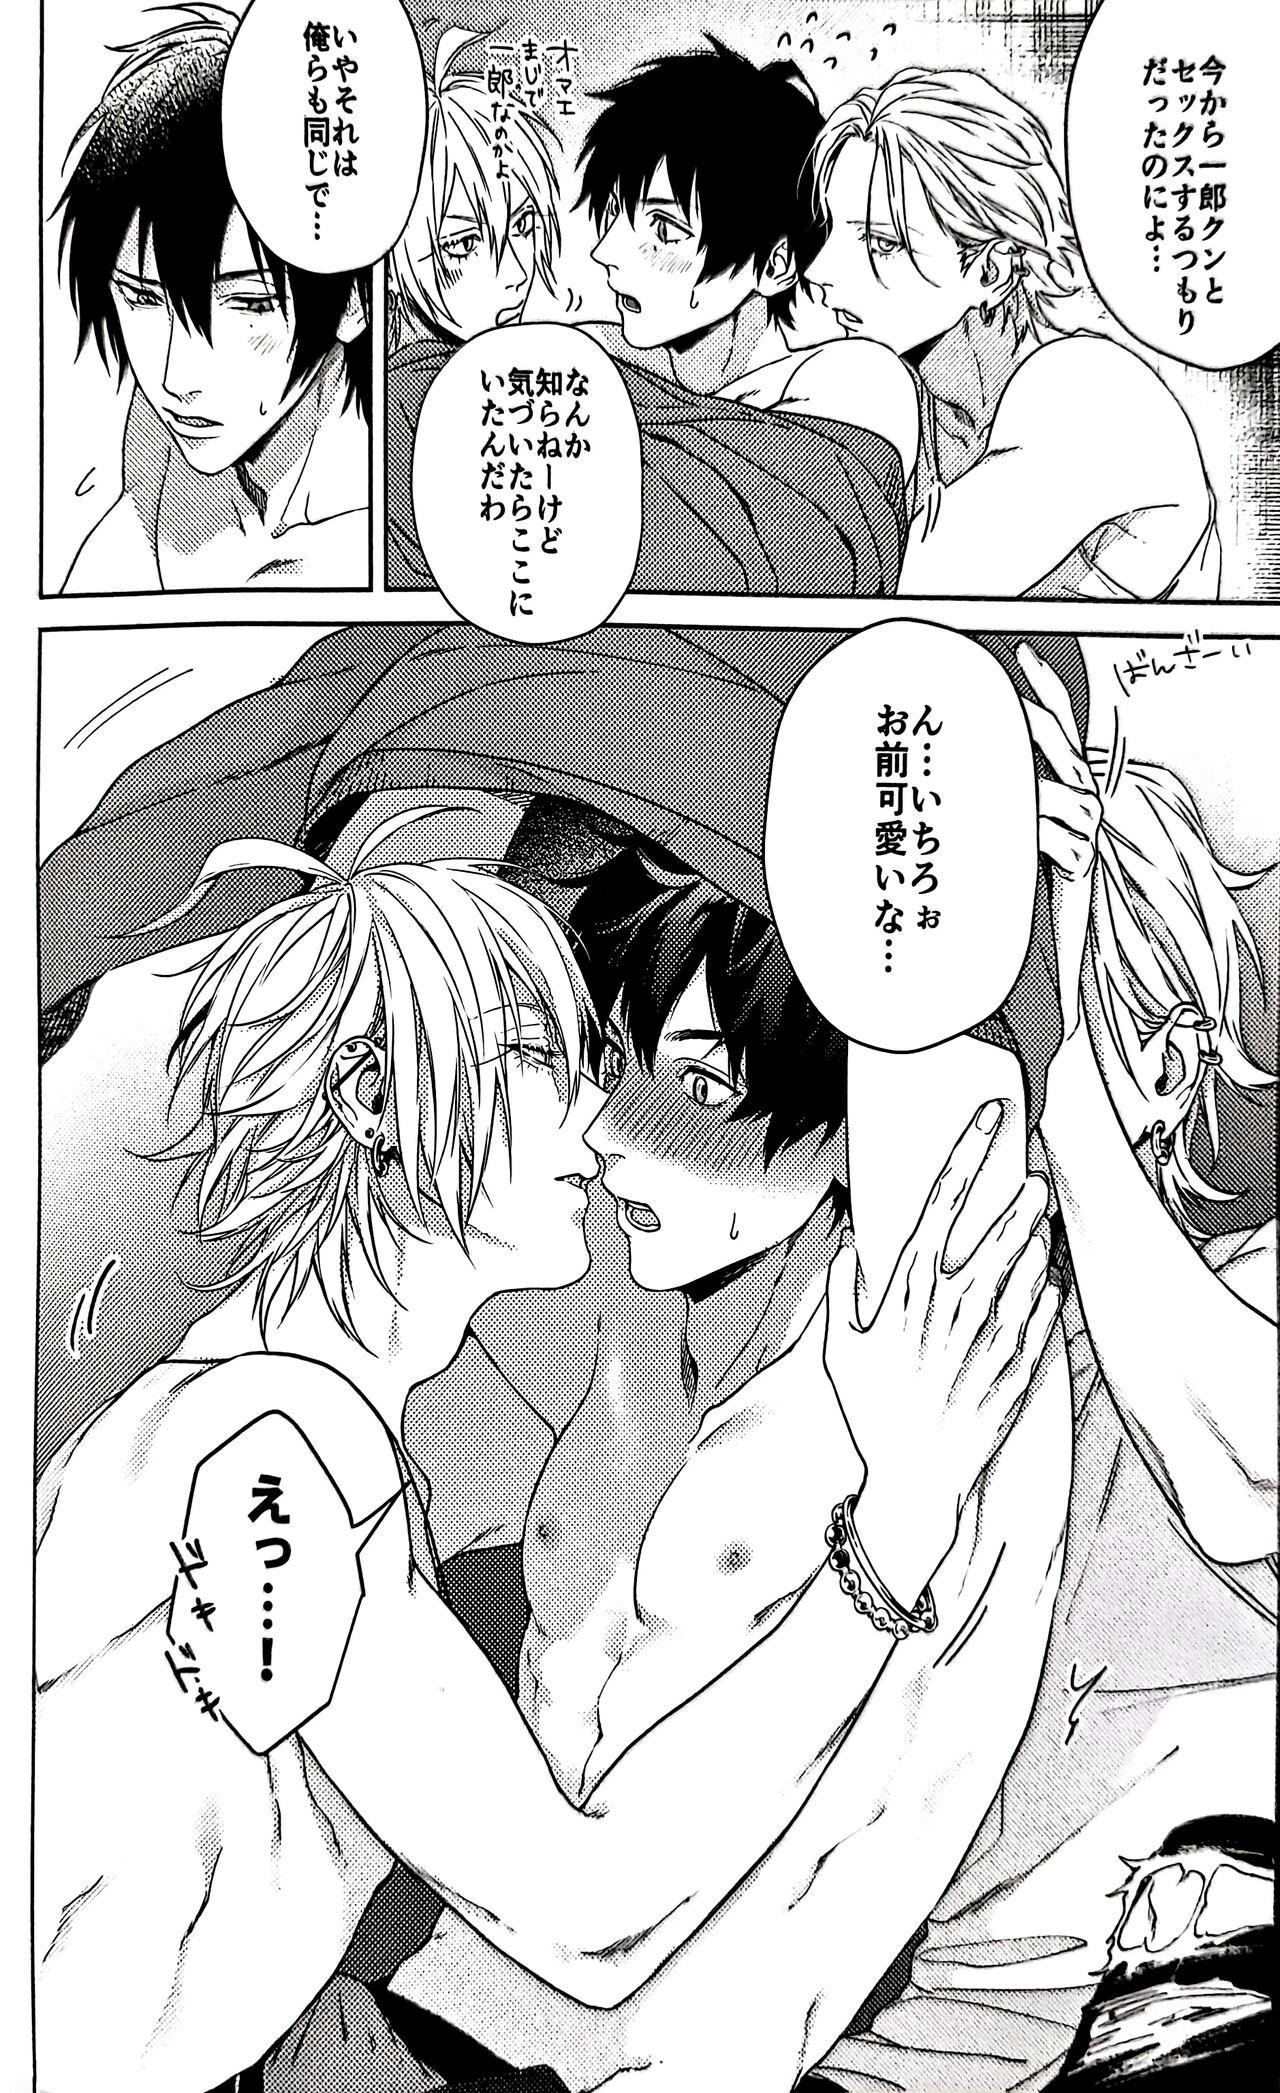 Reverse Cowgirl 蕩れ再録集 R - Hypnosis mic Actress - Page 6